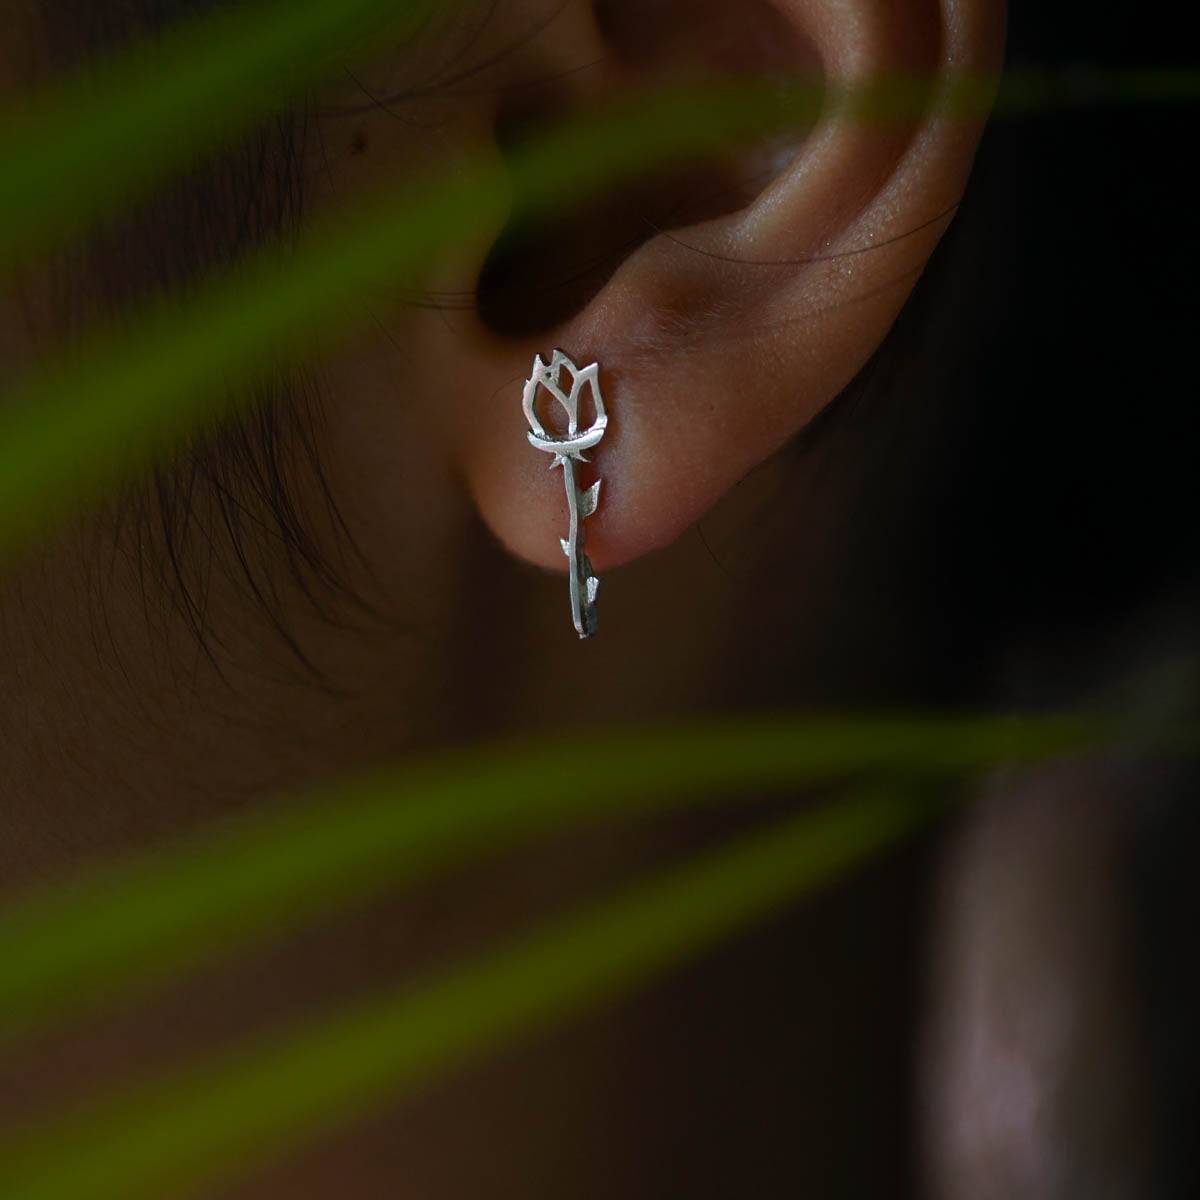 a close up of a person's ear with a pair of scissors in it